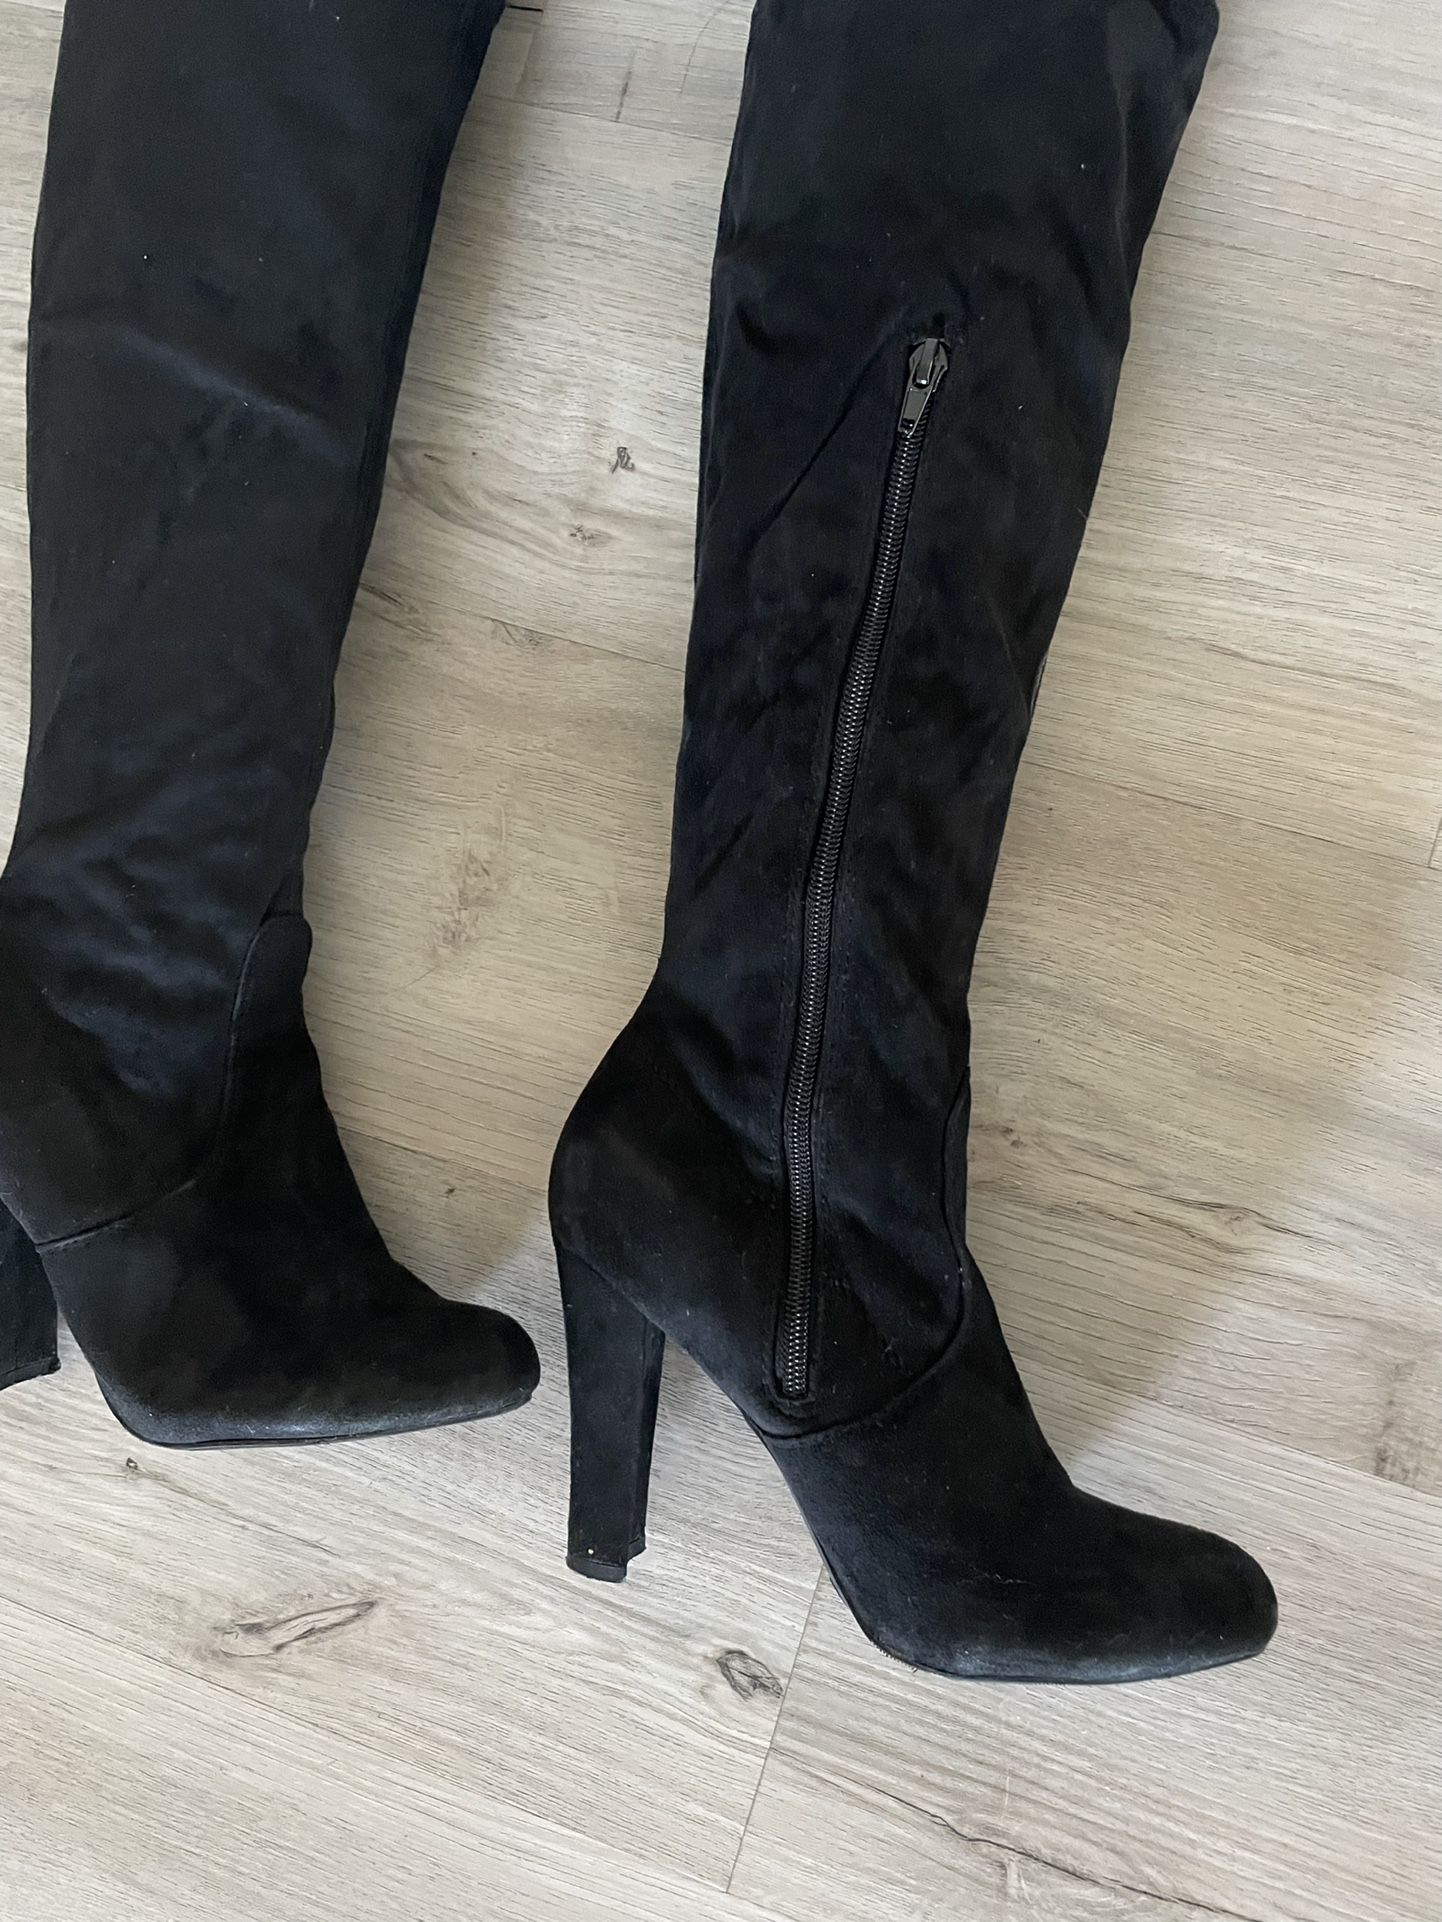 Black Thigh High Boots Size 6 1/2